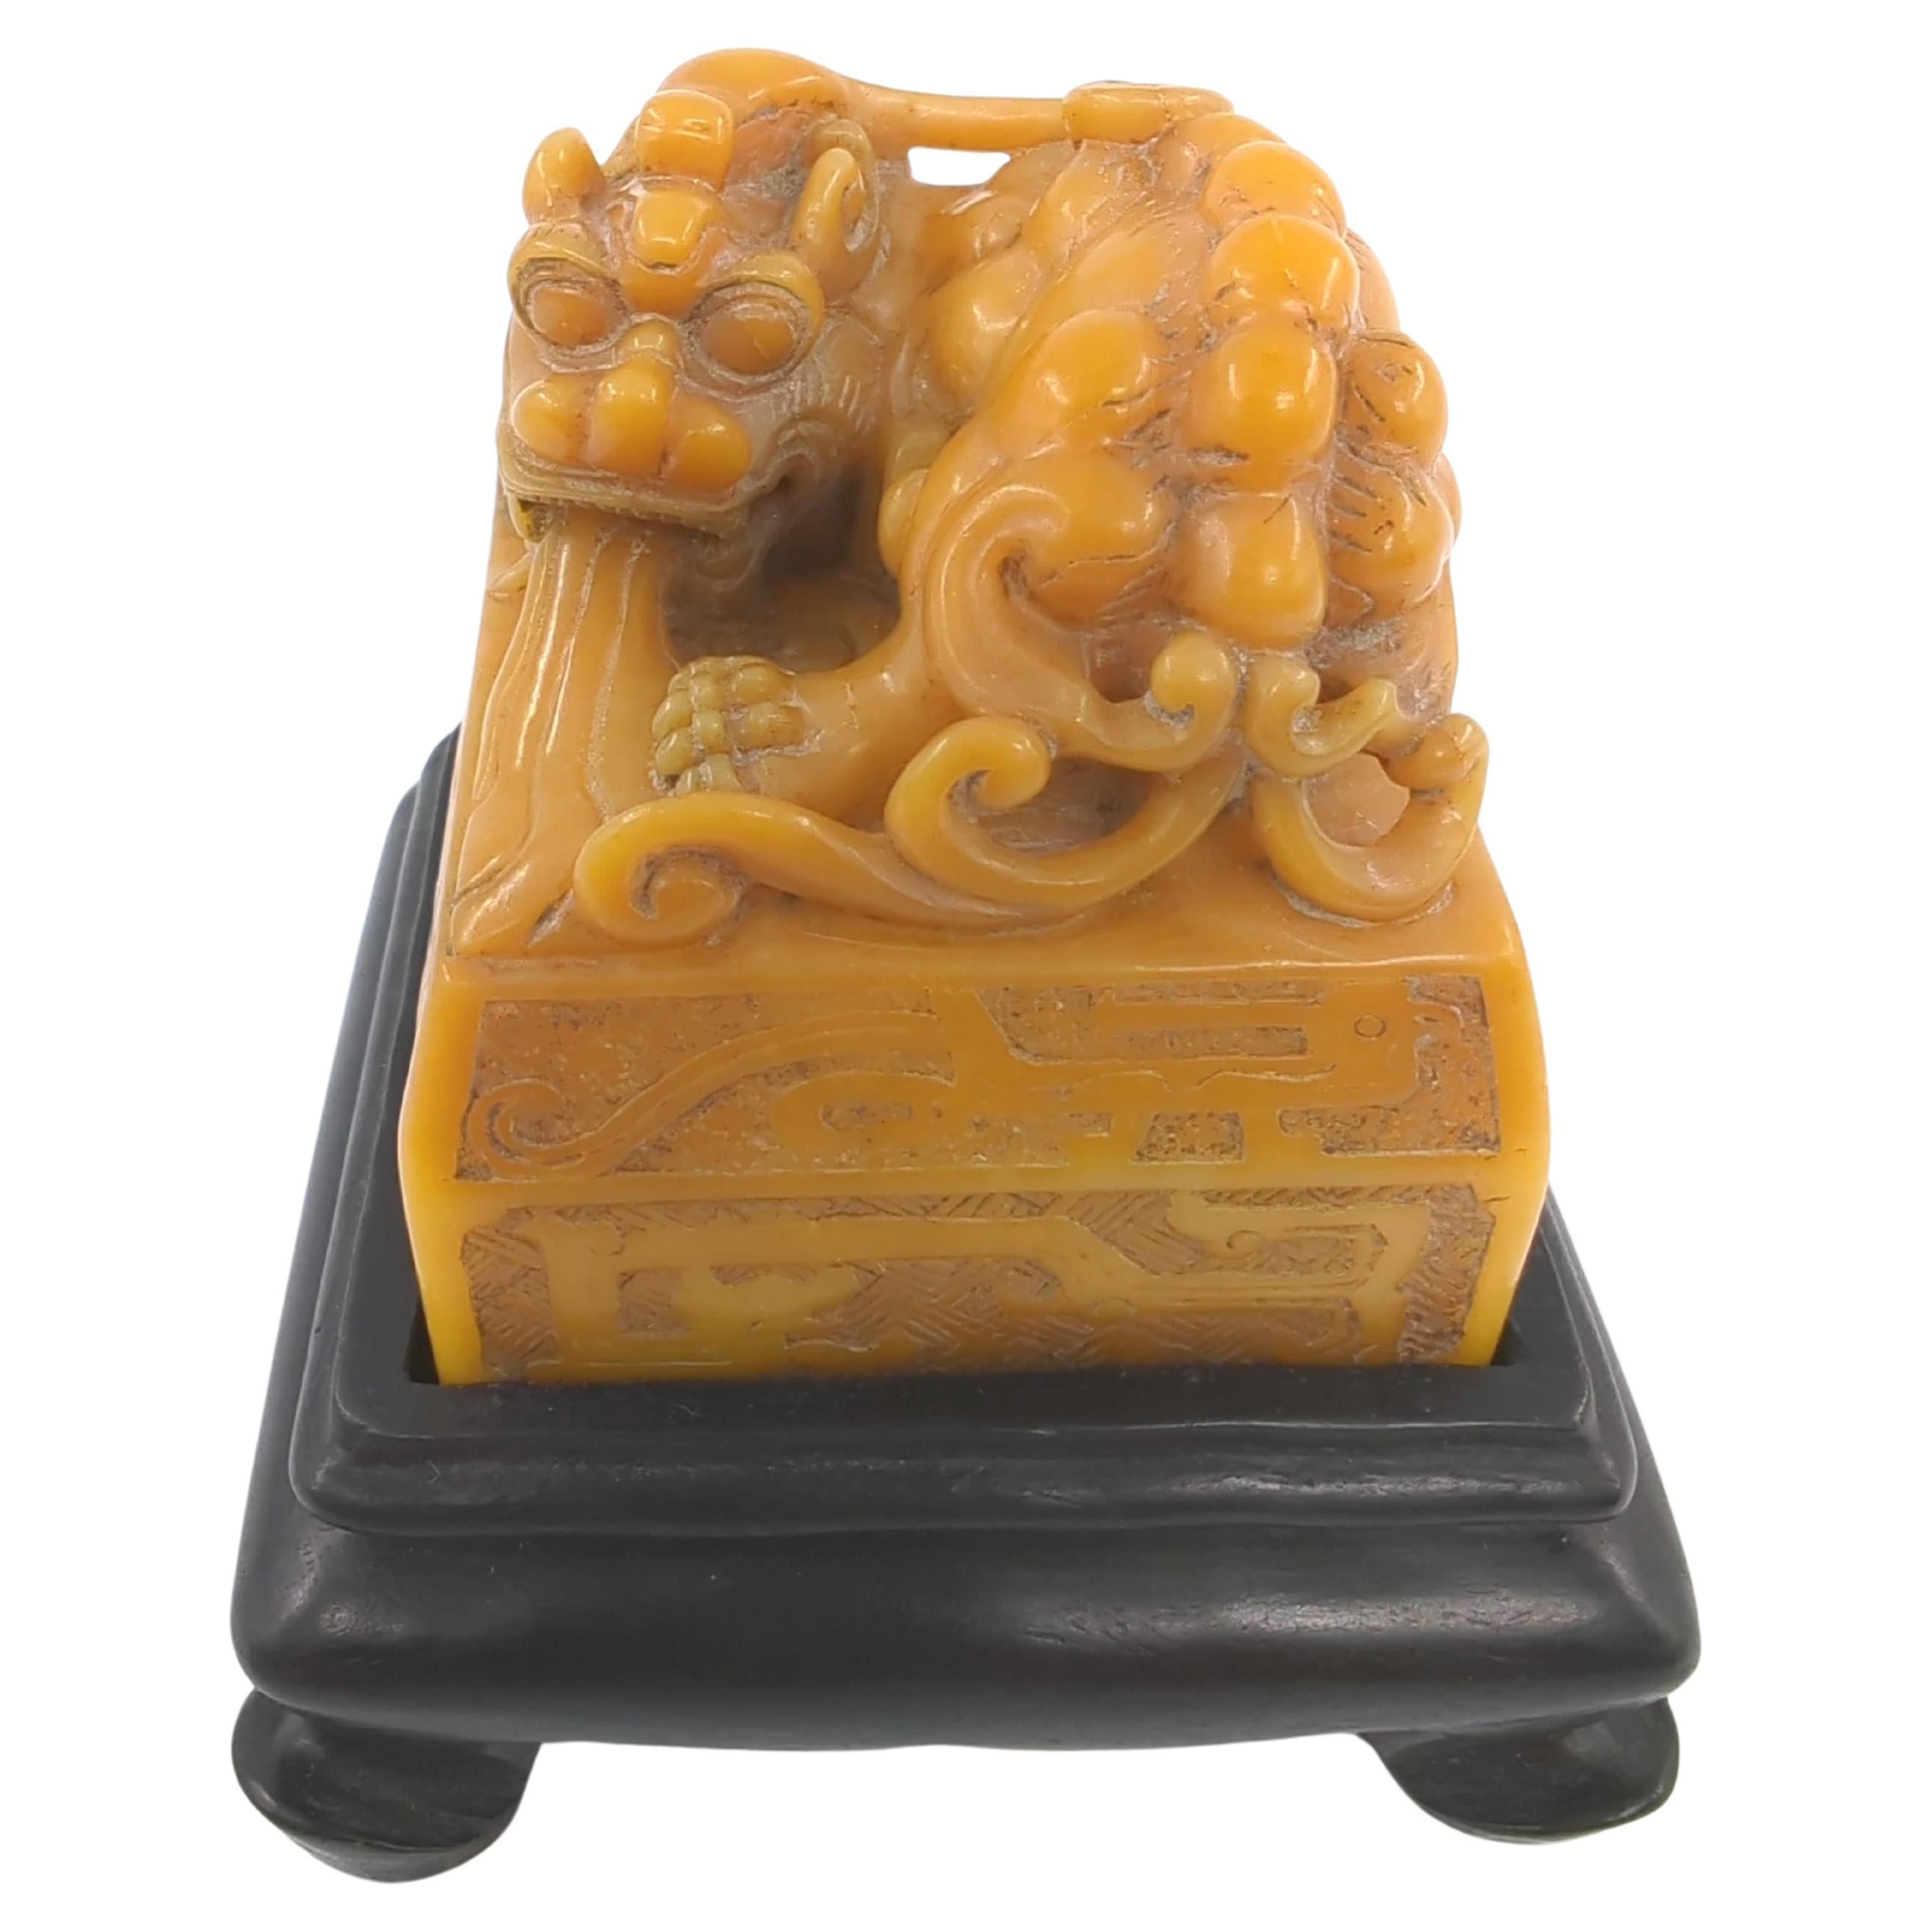 This vintage Chinese seal is an exquisite example of craftsmanship, intricately carved to feature a Pixiu, the legendary son of the dragon, perched majestically atop a square mound. The Pixiu is vividly depicted, complete with water flowing from its